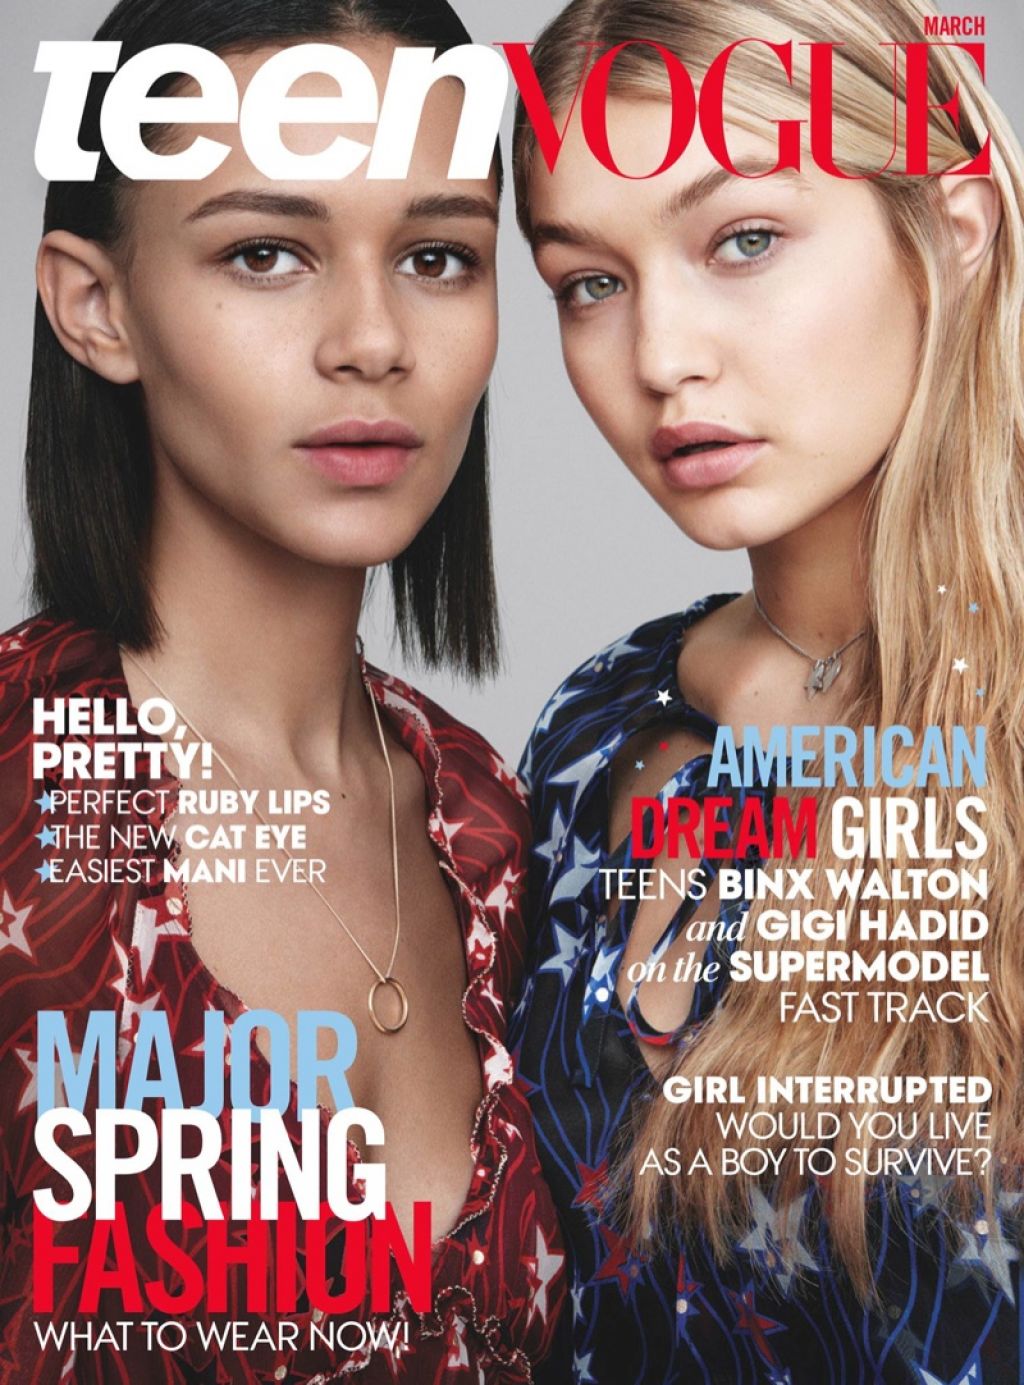 Teen Vogue Magazine Subscription Deal | 1 Year for $4.50 